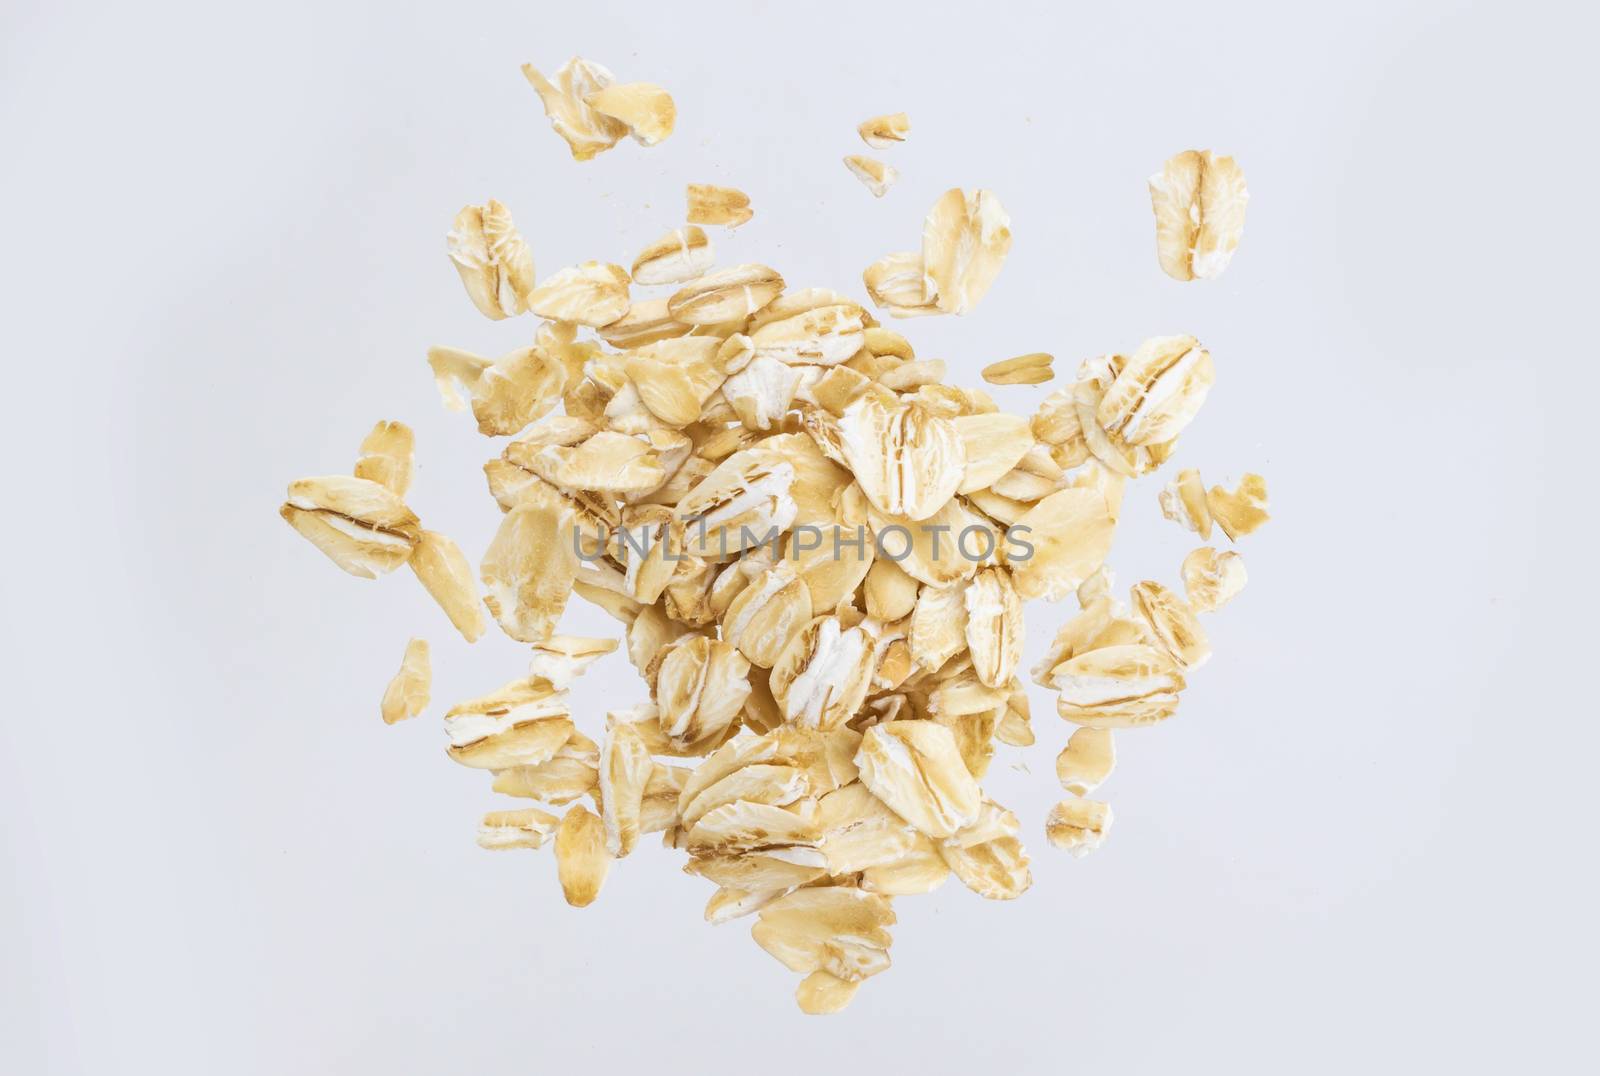 Heap of oat flakes isolated on white background. Top view by xamtiw